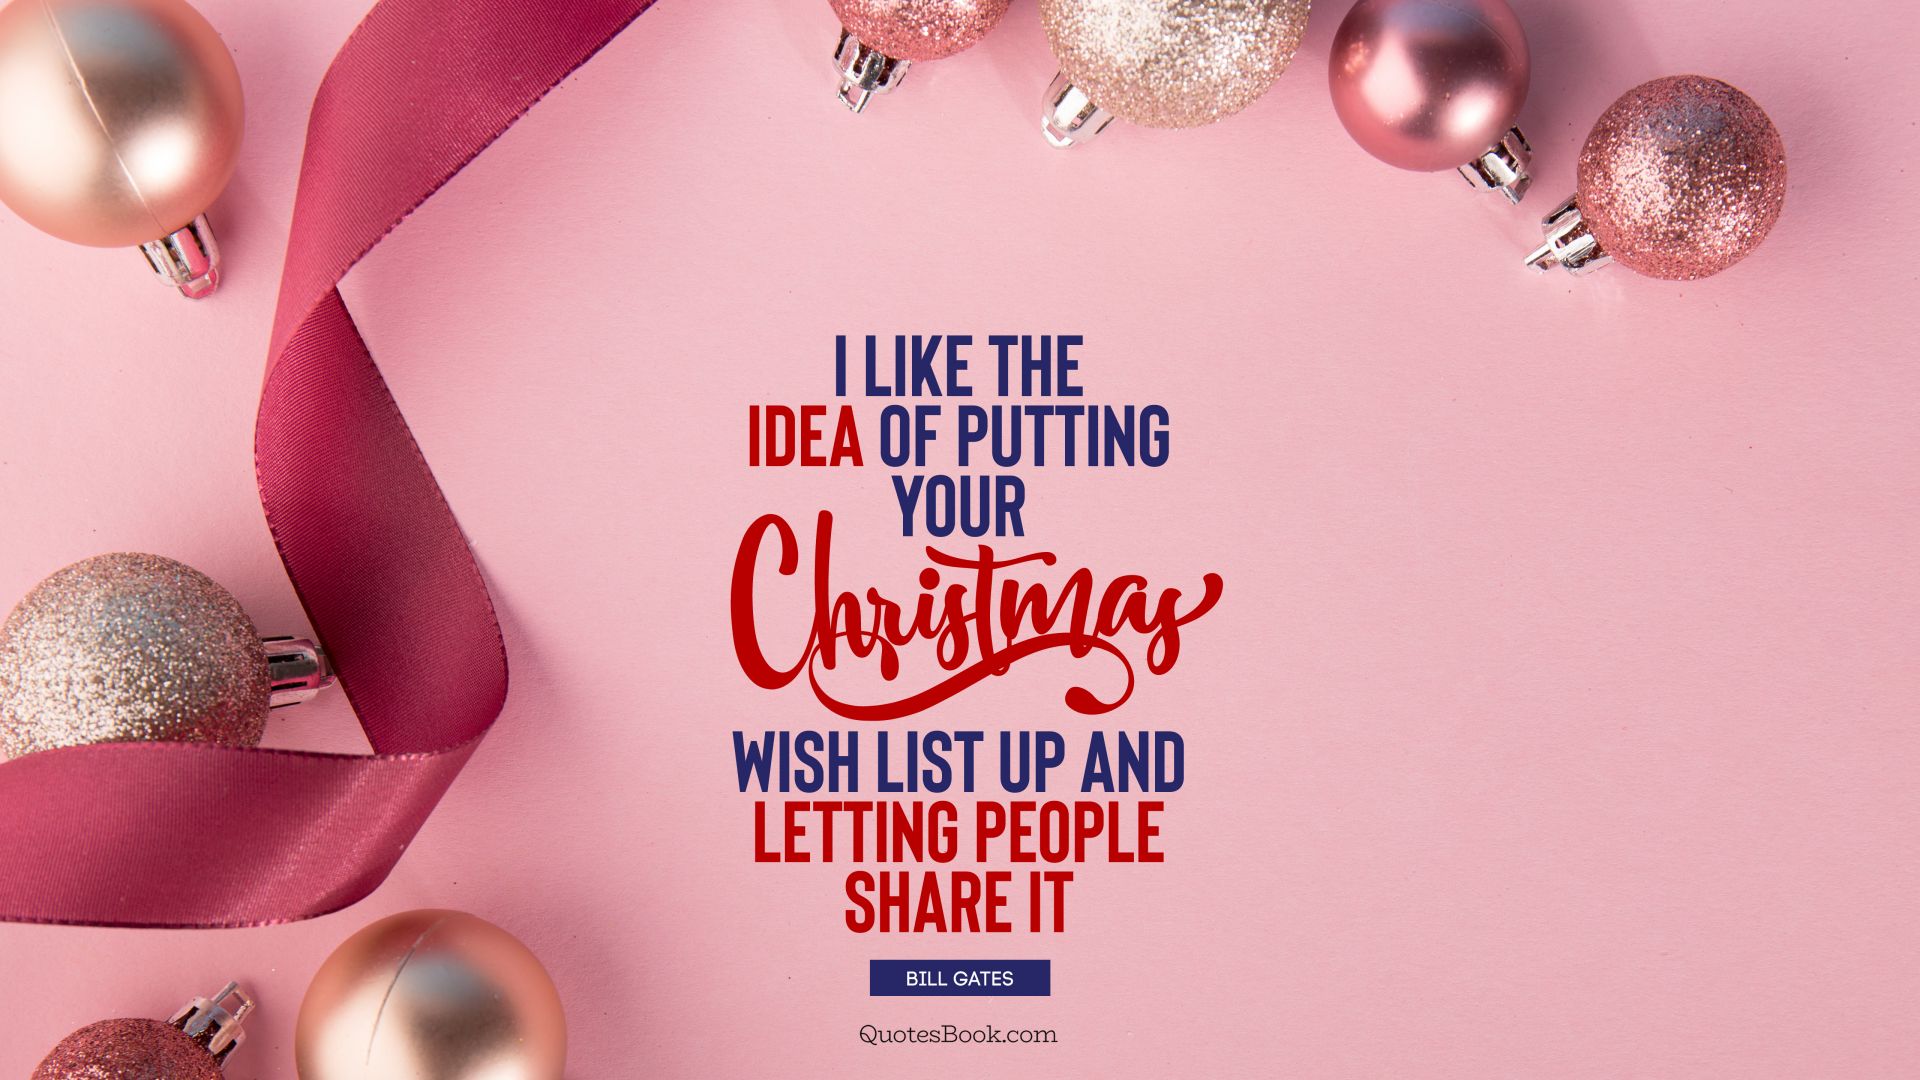 I like the idea of putting your Christmas wish list up and letting people share it. - Quote by Bill Gates